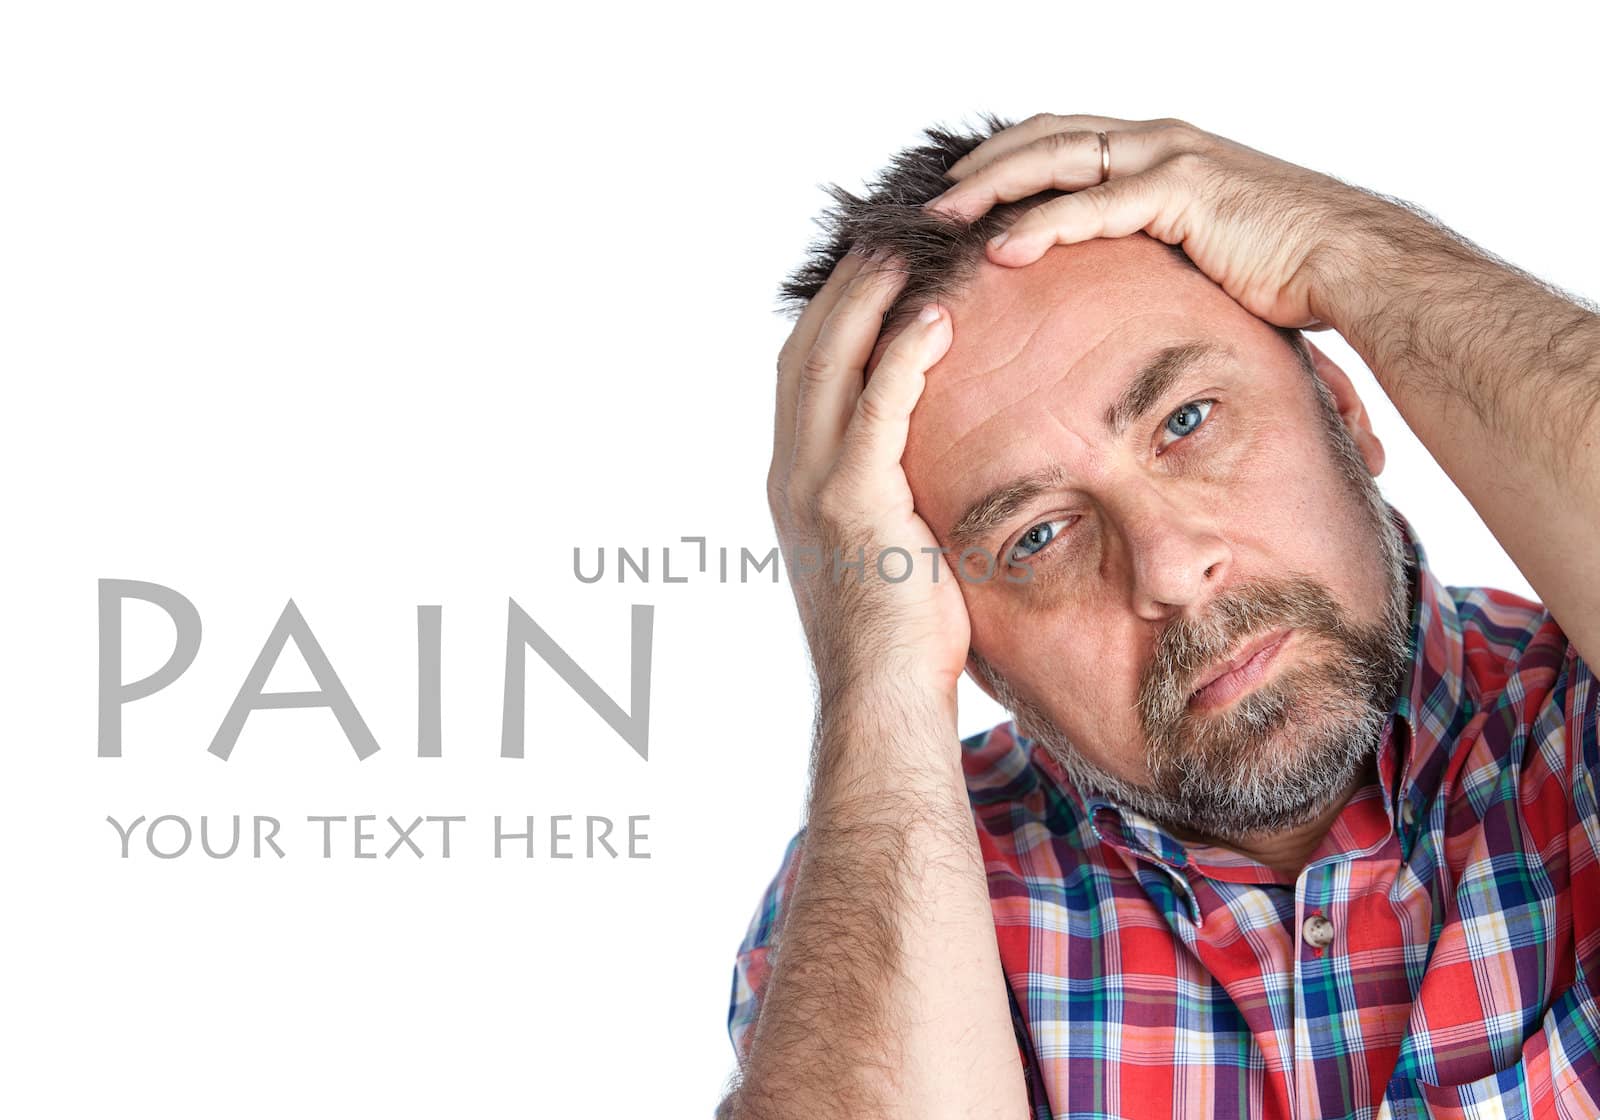 Pain. Portrait of an middle age man suffering from a headache with copyspace